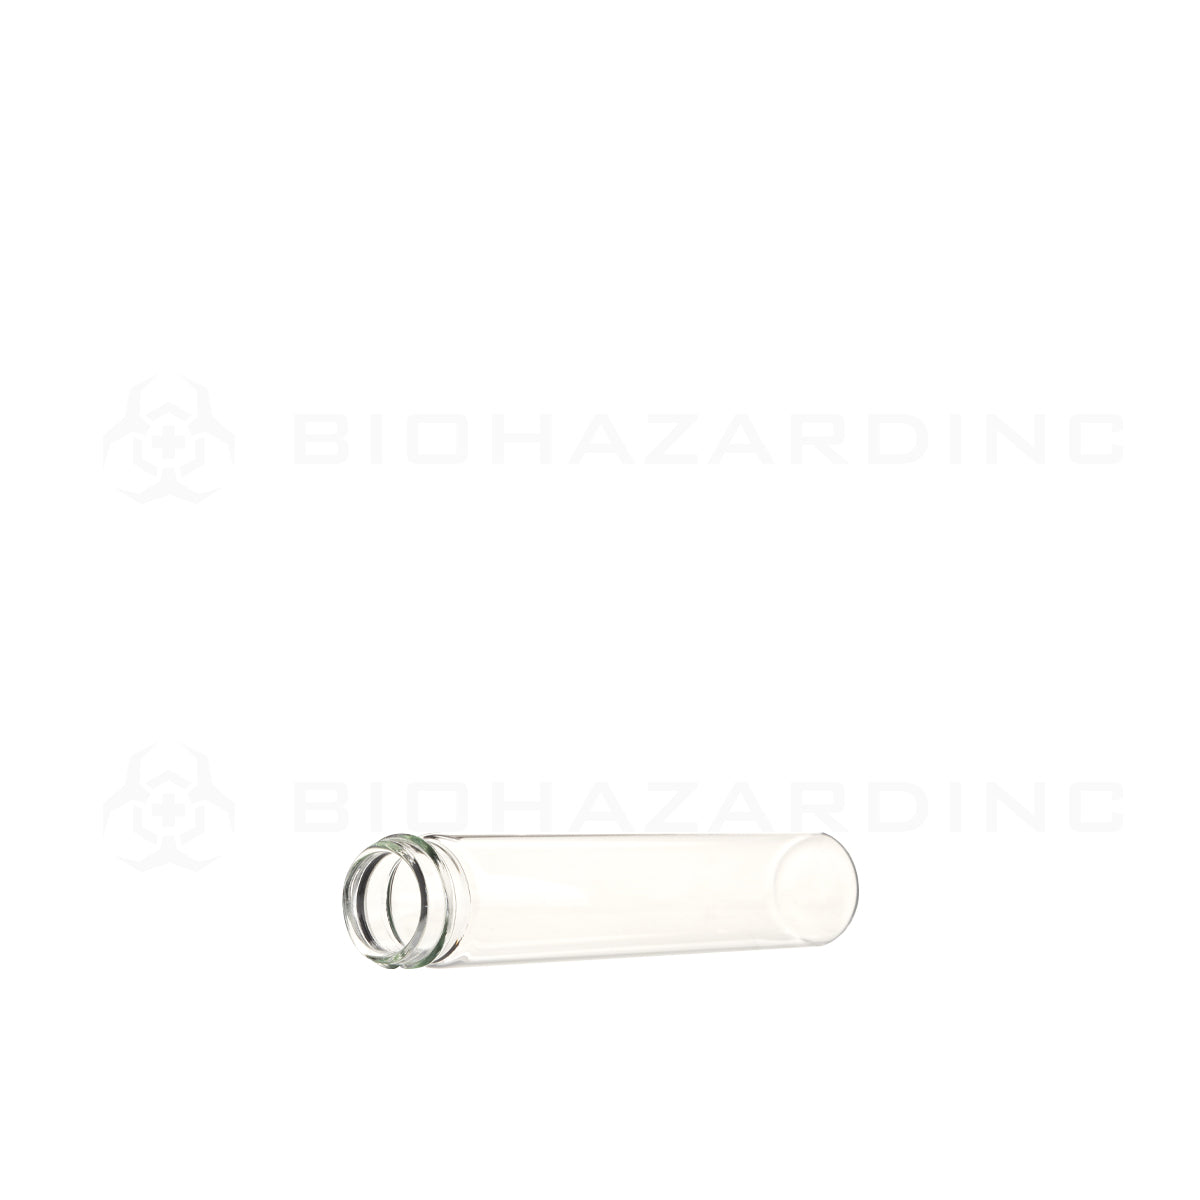 Glass Vial | Clear Glass Pre-Roll Tube | 22mm - 110mm - 203 Count Glass Vial Biohazard Inc   